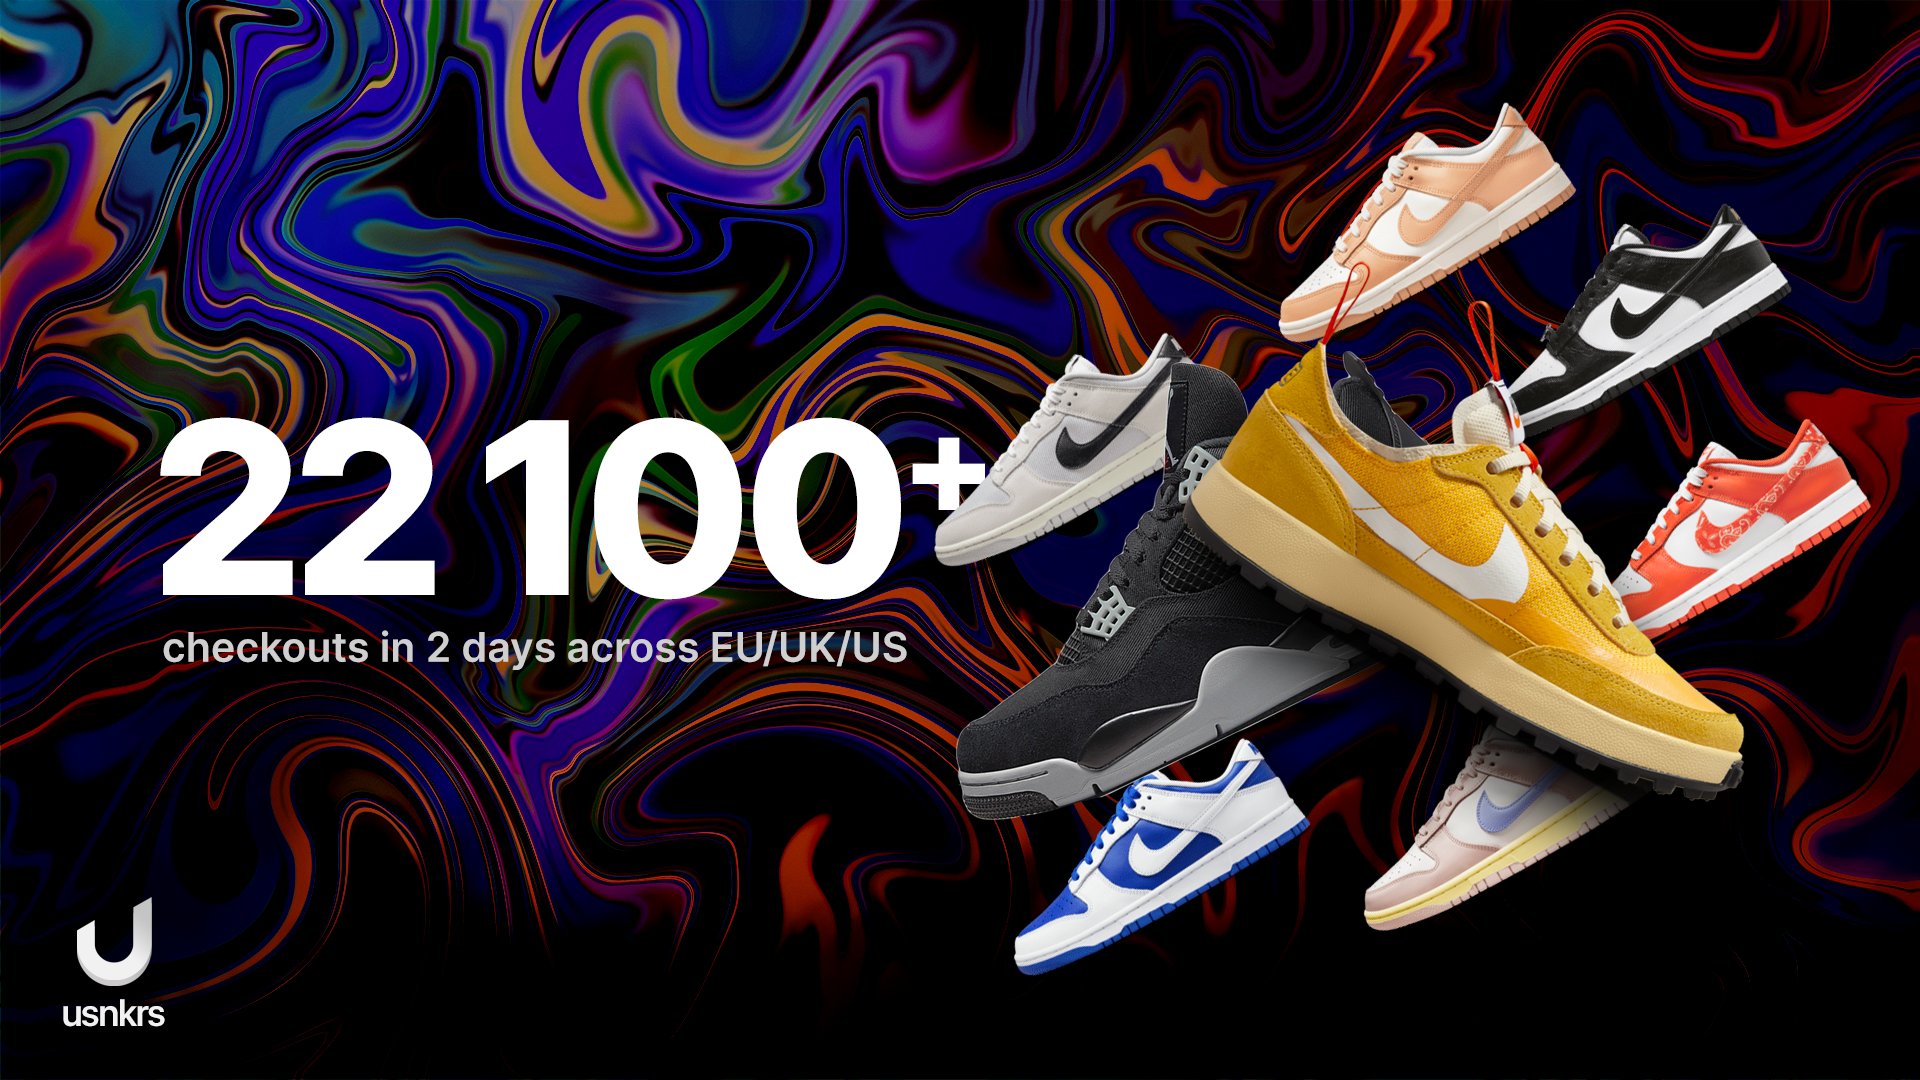 uTools on Twitter: "🇺🇸🇬🇧  🇮🇹🇧🇪🇳🇱🇵🇱🇨🇿🇩🇪🇫🇷🇪🇸🇵🇹🇭🇺🇩🇰🇸🇪🇮🇪🇭🇺🇲🇽 Over 22,000  pairs were secured in 2 days by approx 1700 users across EU, UK &amp; US.  The Number 1 Nike/SNKRS Bot on the market. Consistent always.